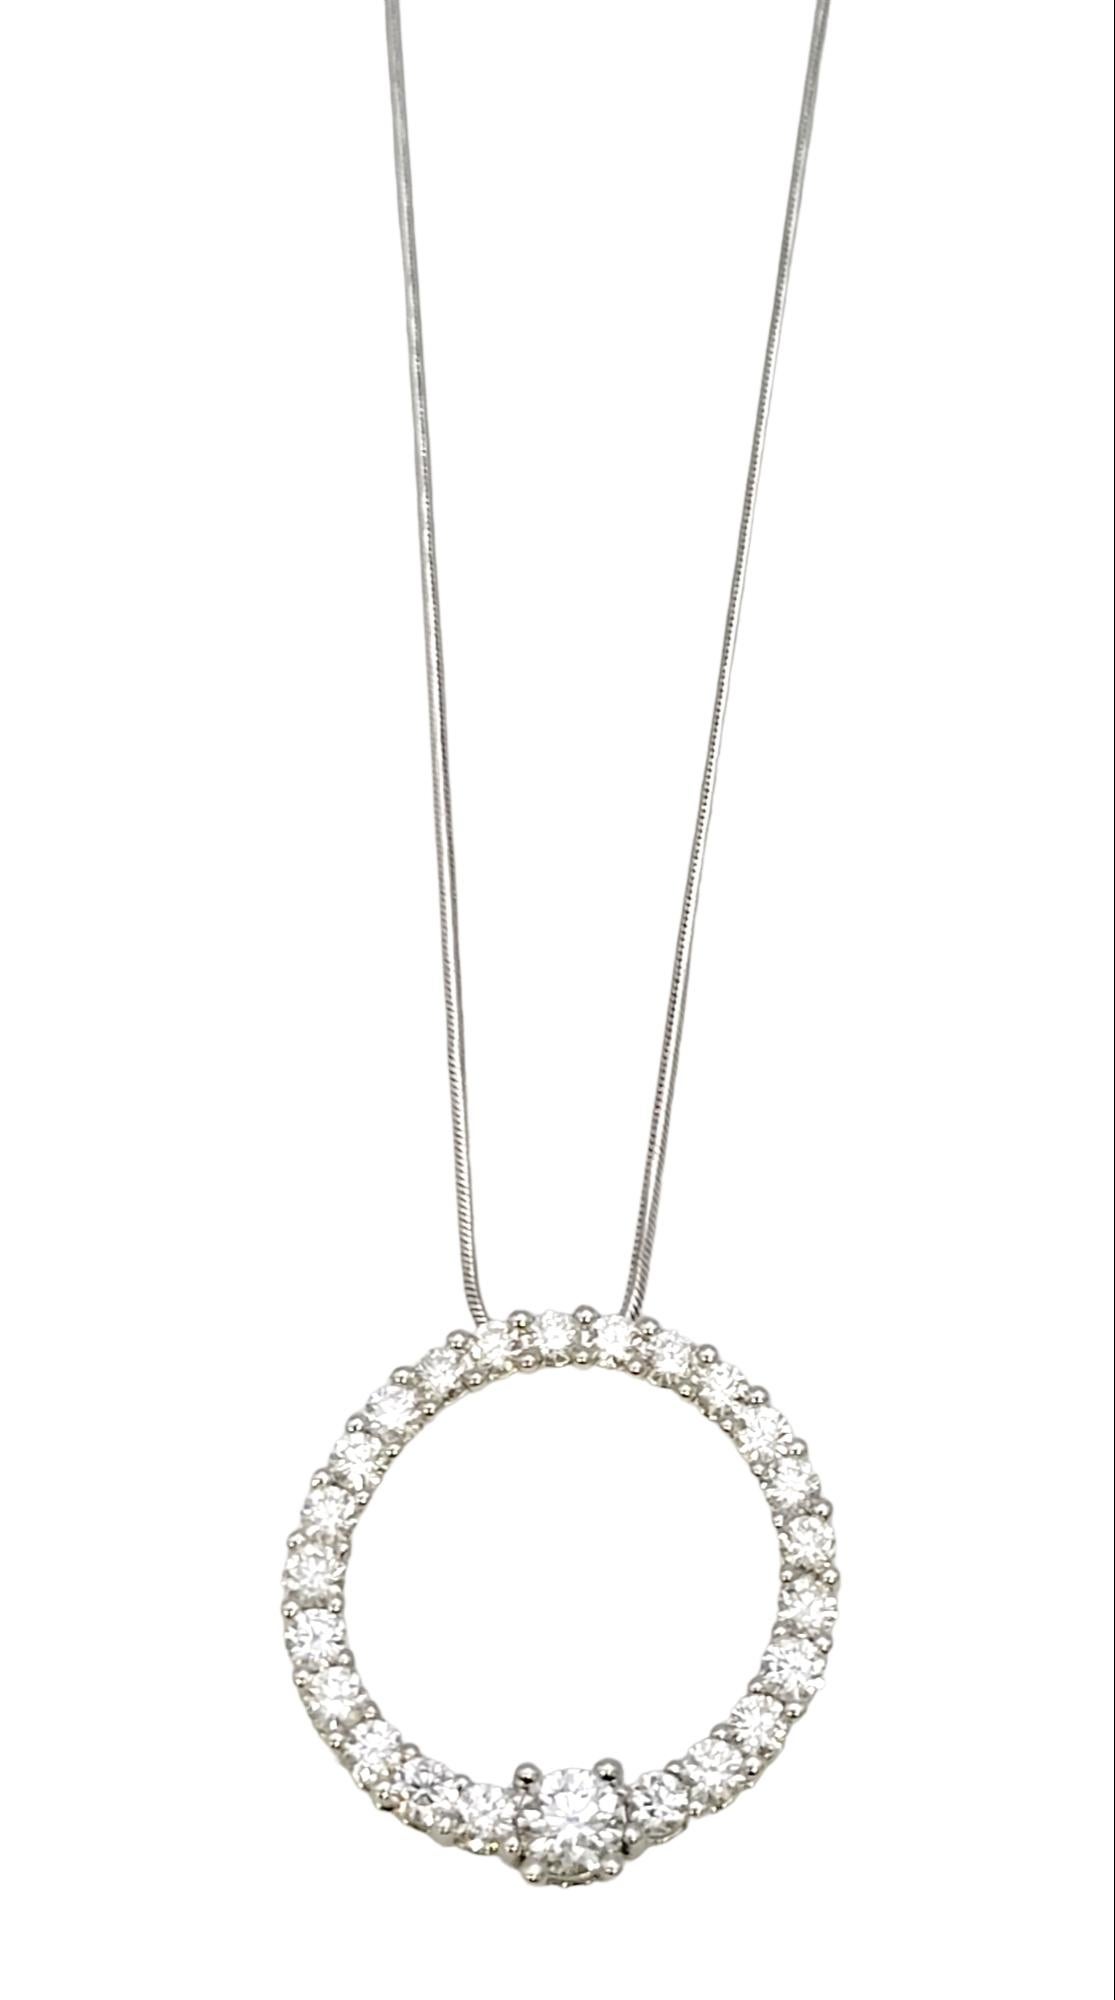 Graduated Round Diamond Open Circle Pendant Necklace in 14 Karat White Gold In Good Condition For Sale In Scottsdale, AZ